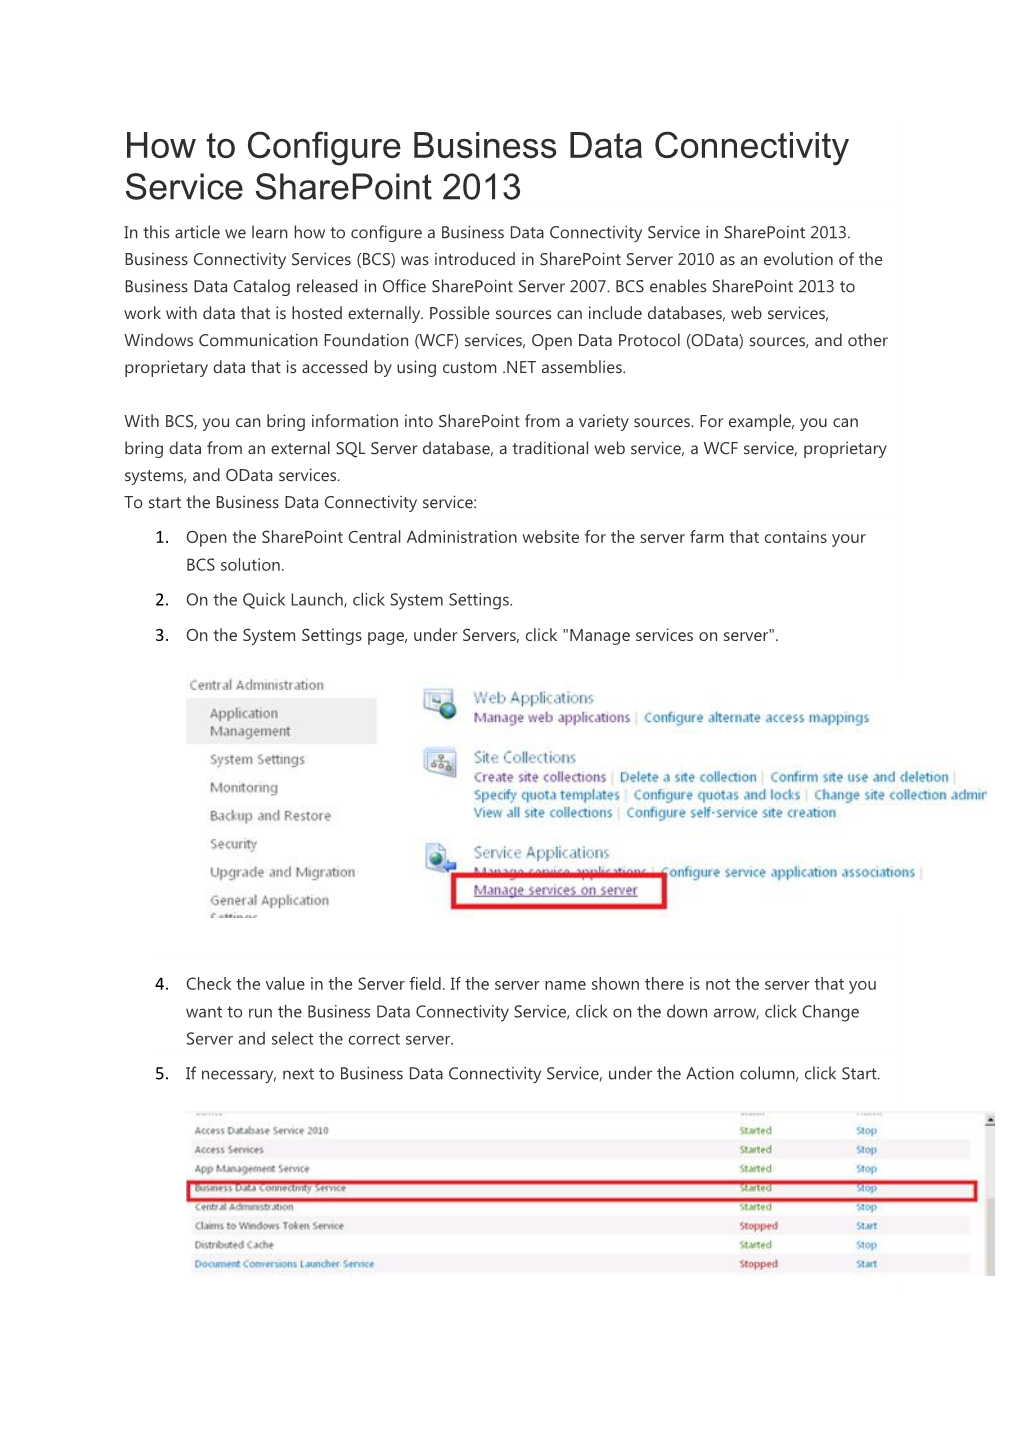 How to Configure Business Data Connectivity Service Sharepoint 2013